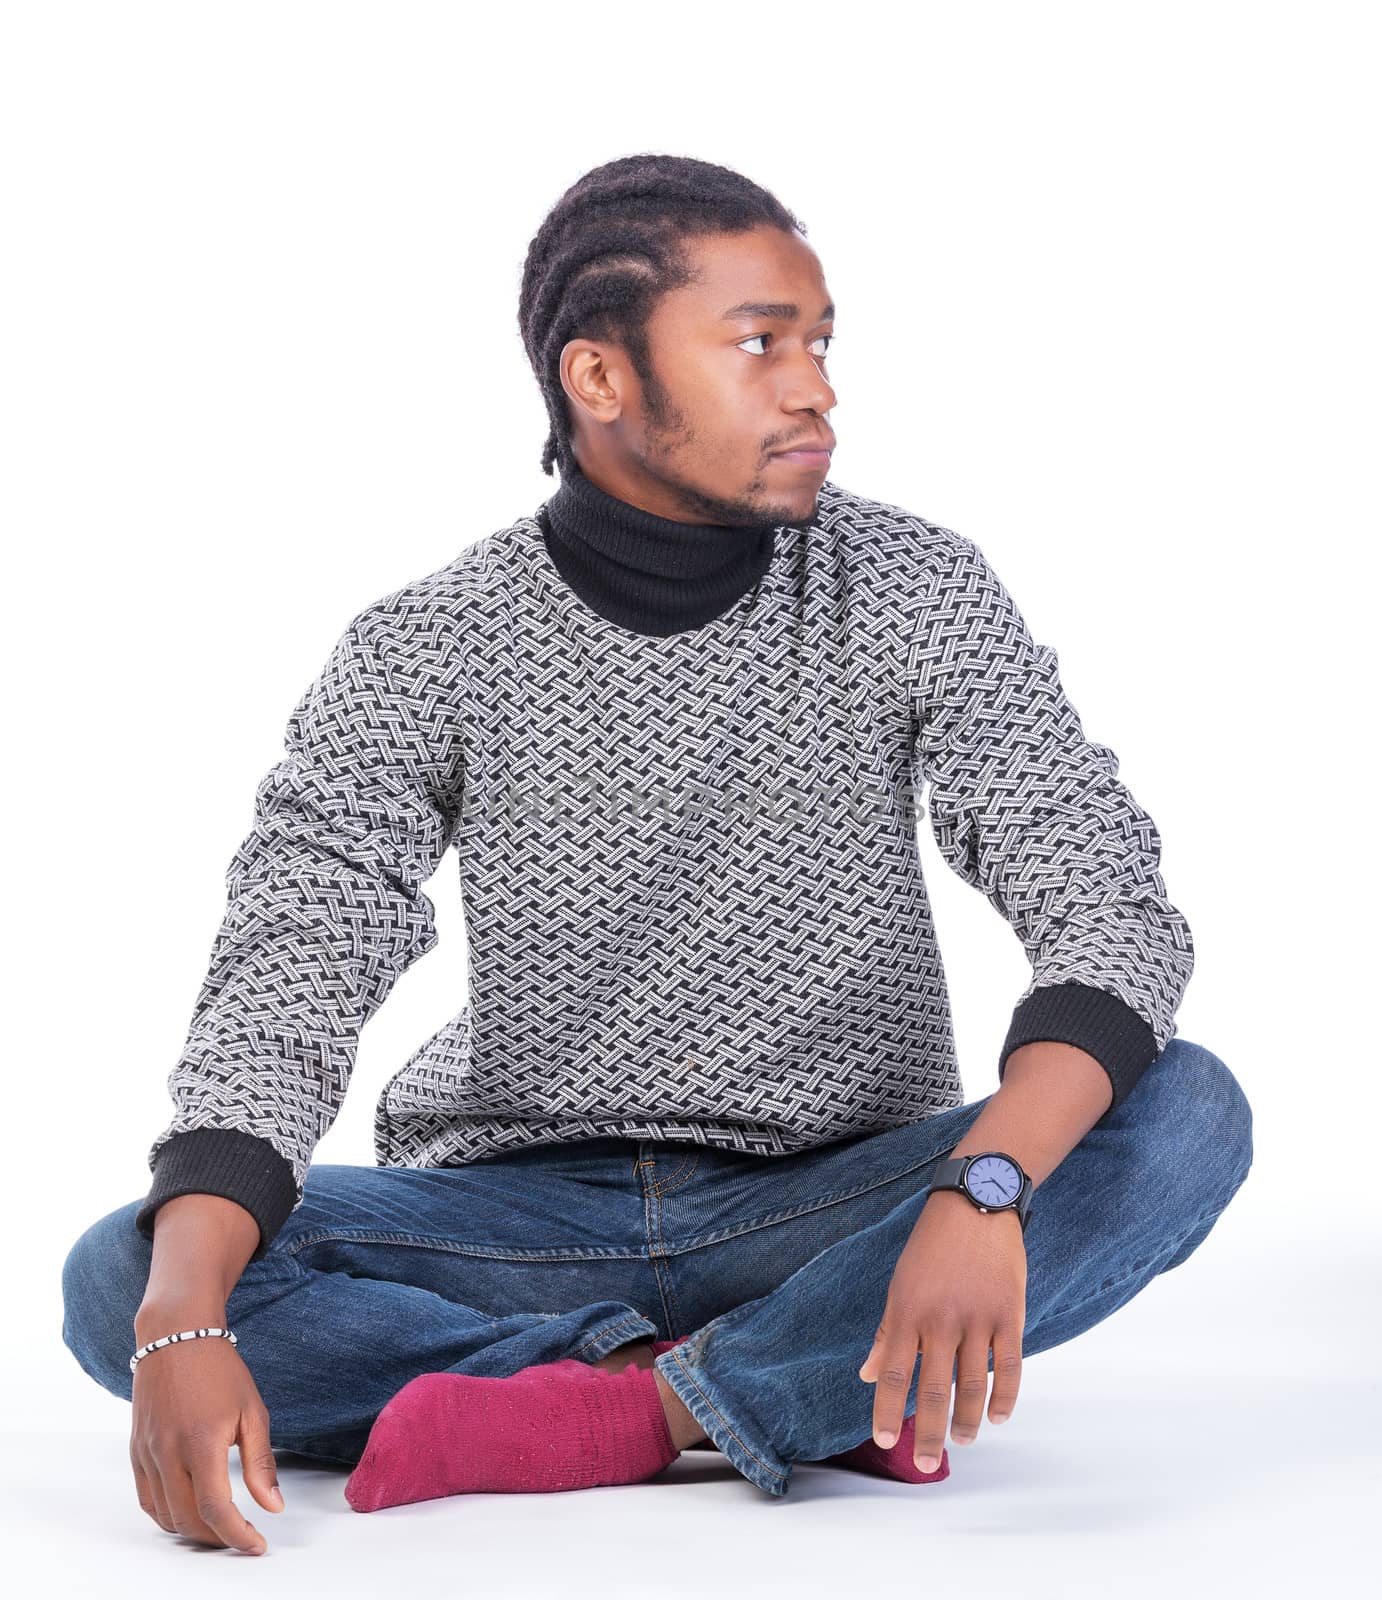 Young African-American male sitting on the ground looking to his side in a white background